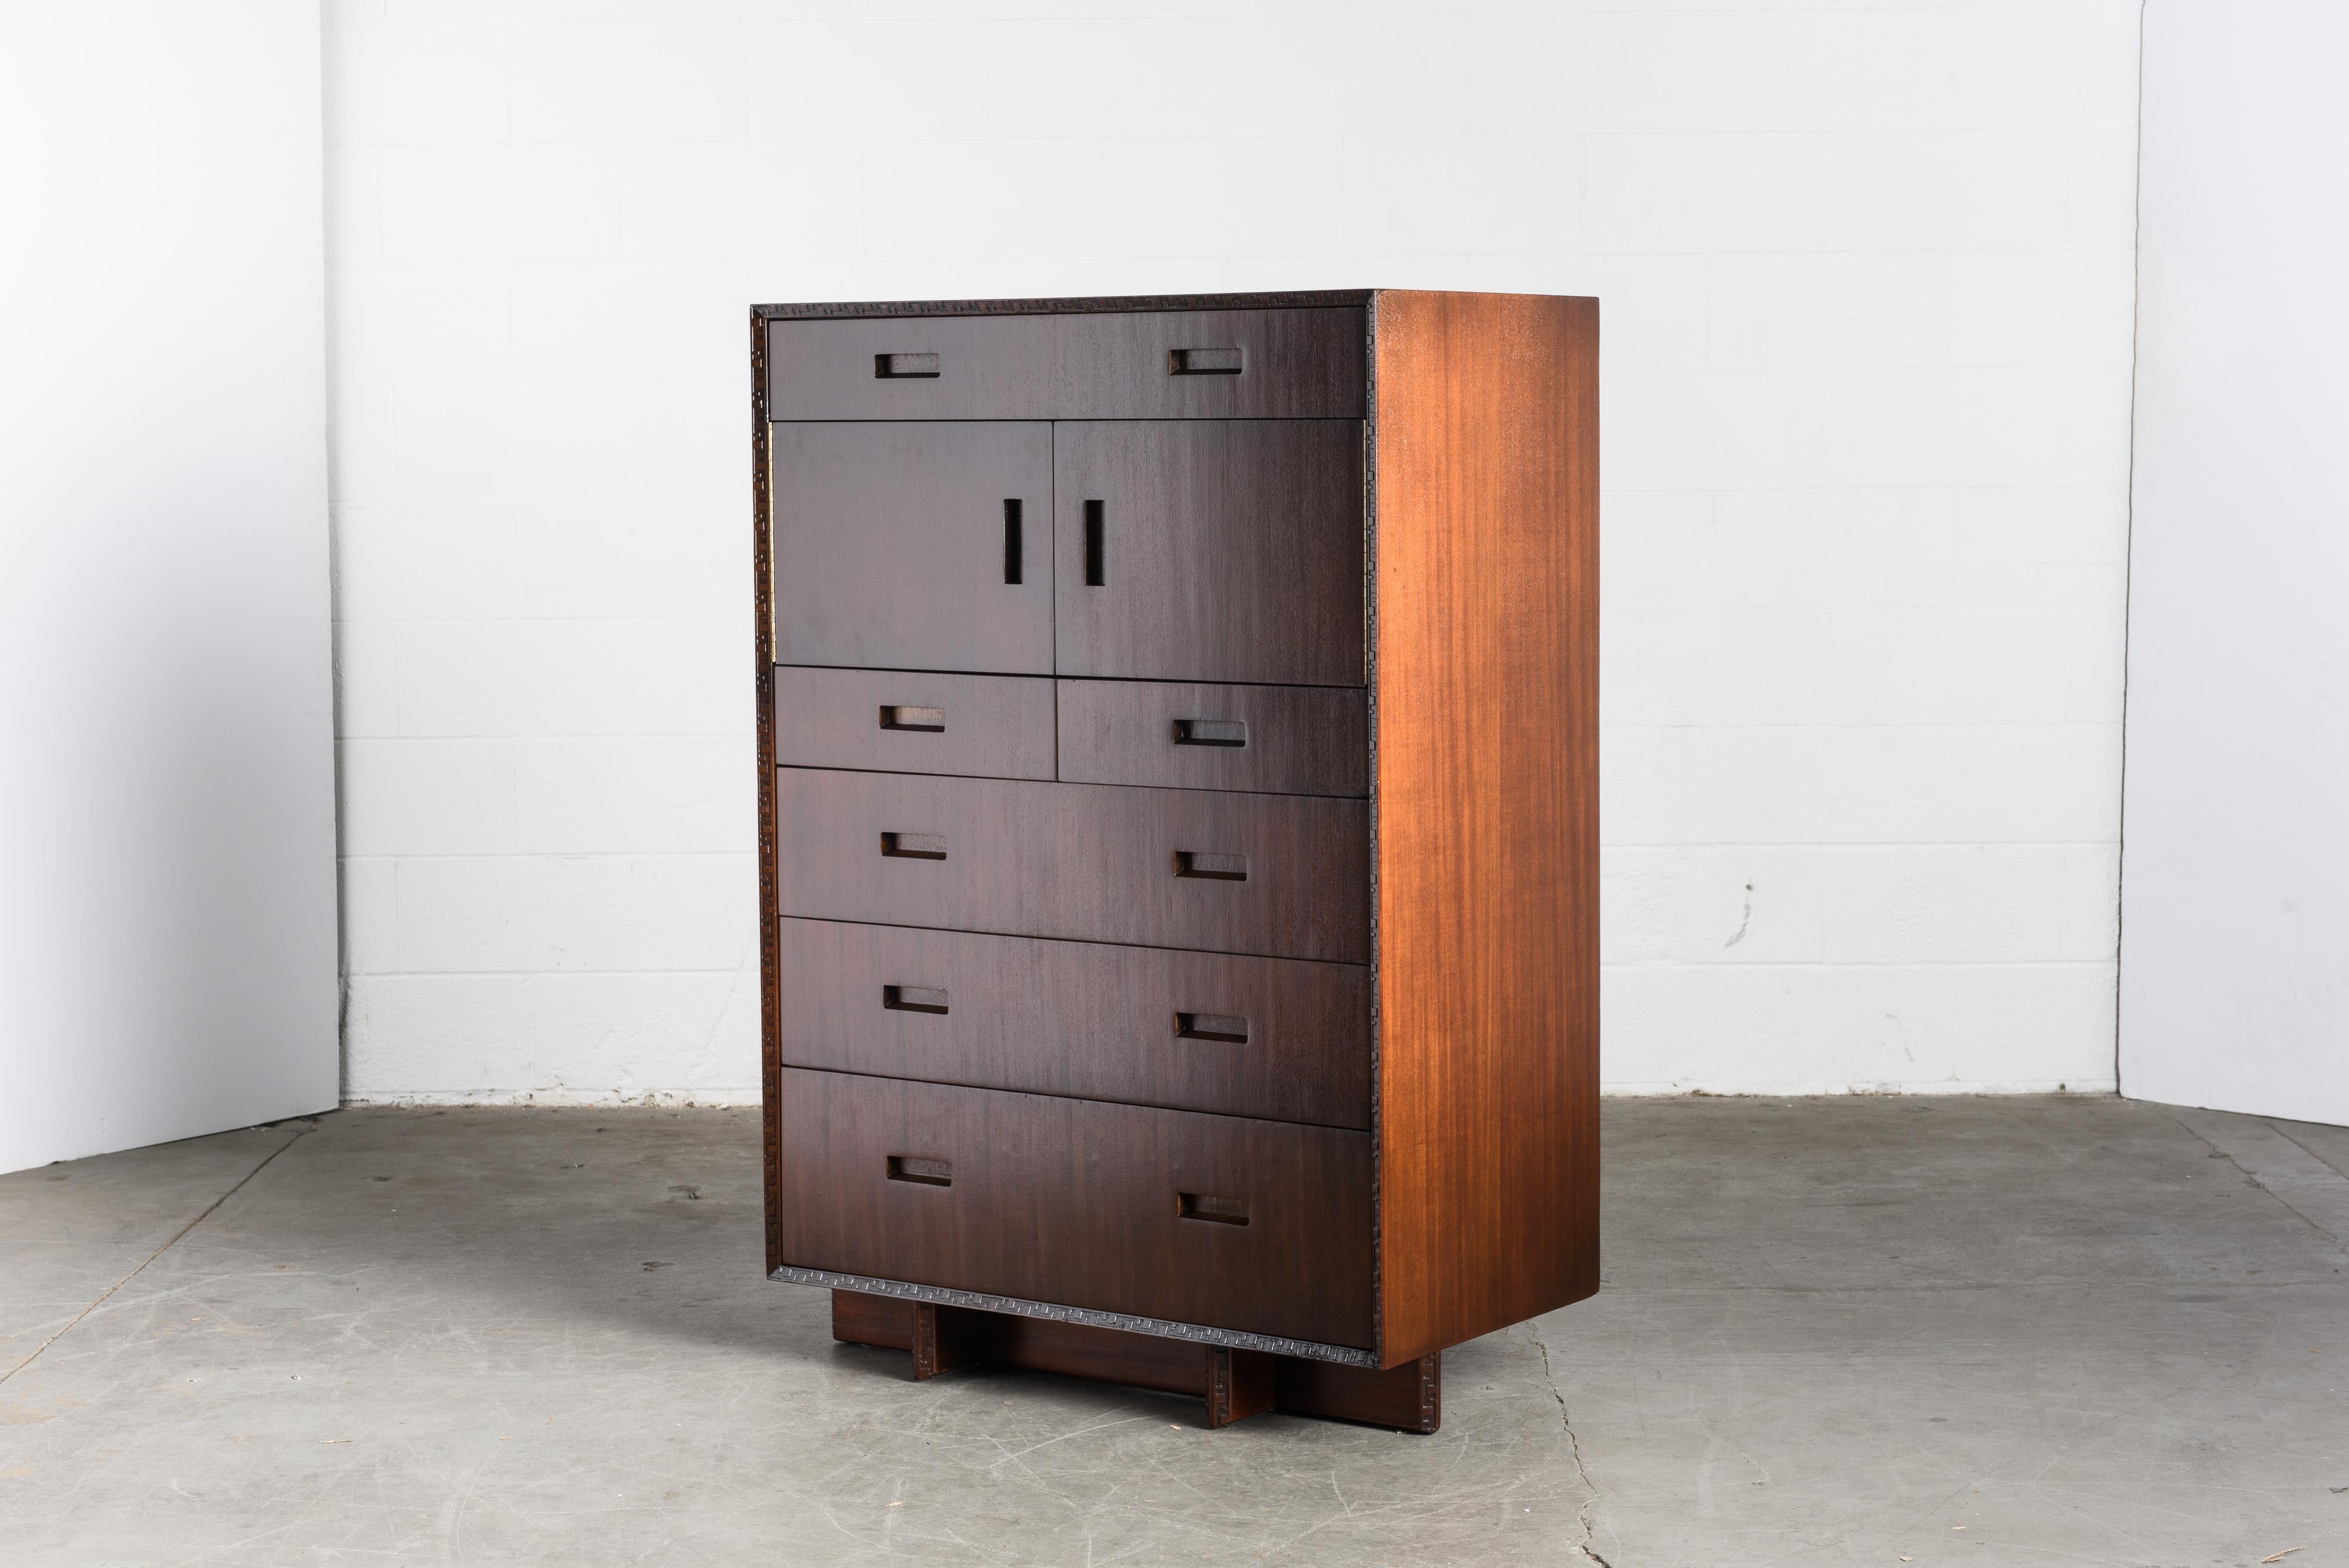 This gorgeously refinished Honduran Mahogany 'Taliesin' highboy dresser, Model #2000, was designed by Frank Lloyd Wright for Heritage-Henredon in 1955 and produced only for two years, therefore is now a highly sought-after and rare collectors item.